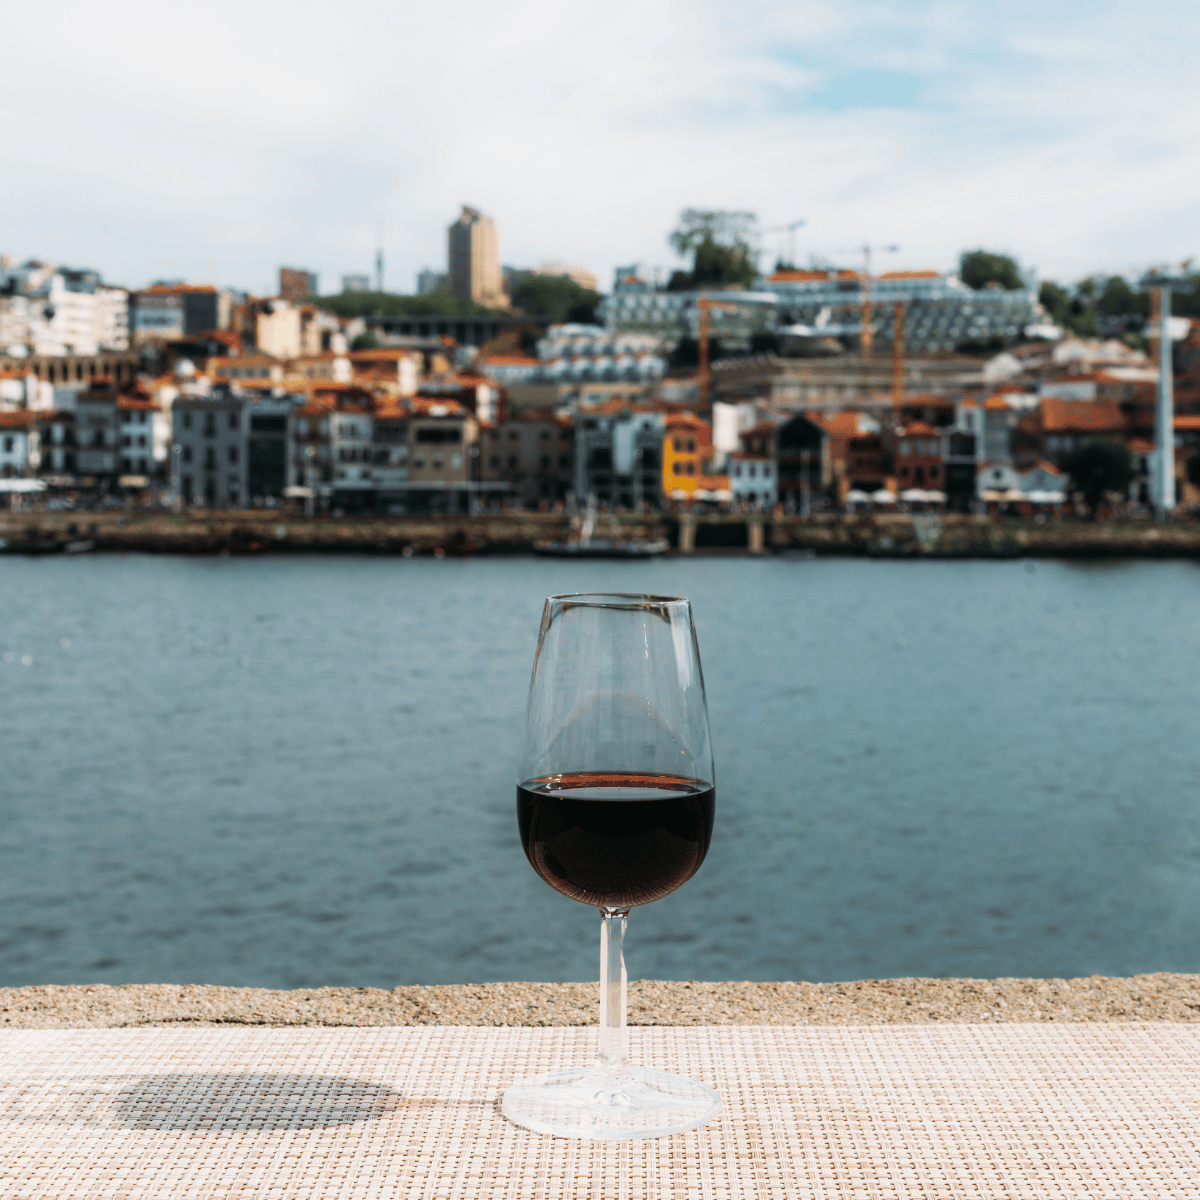 Port wine - a great way to remember port and starboard side of a cruise ship